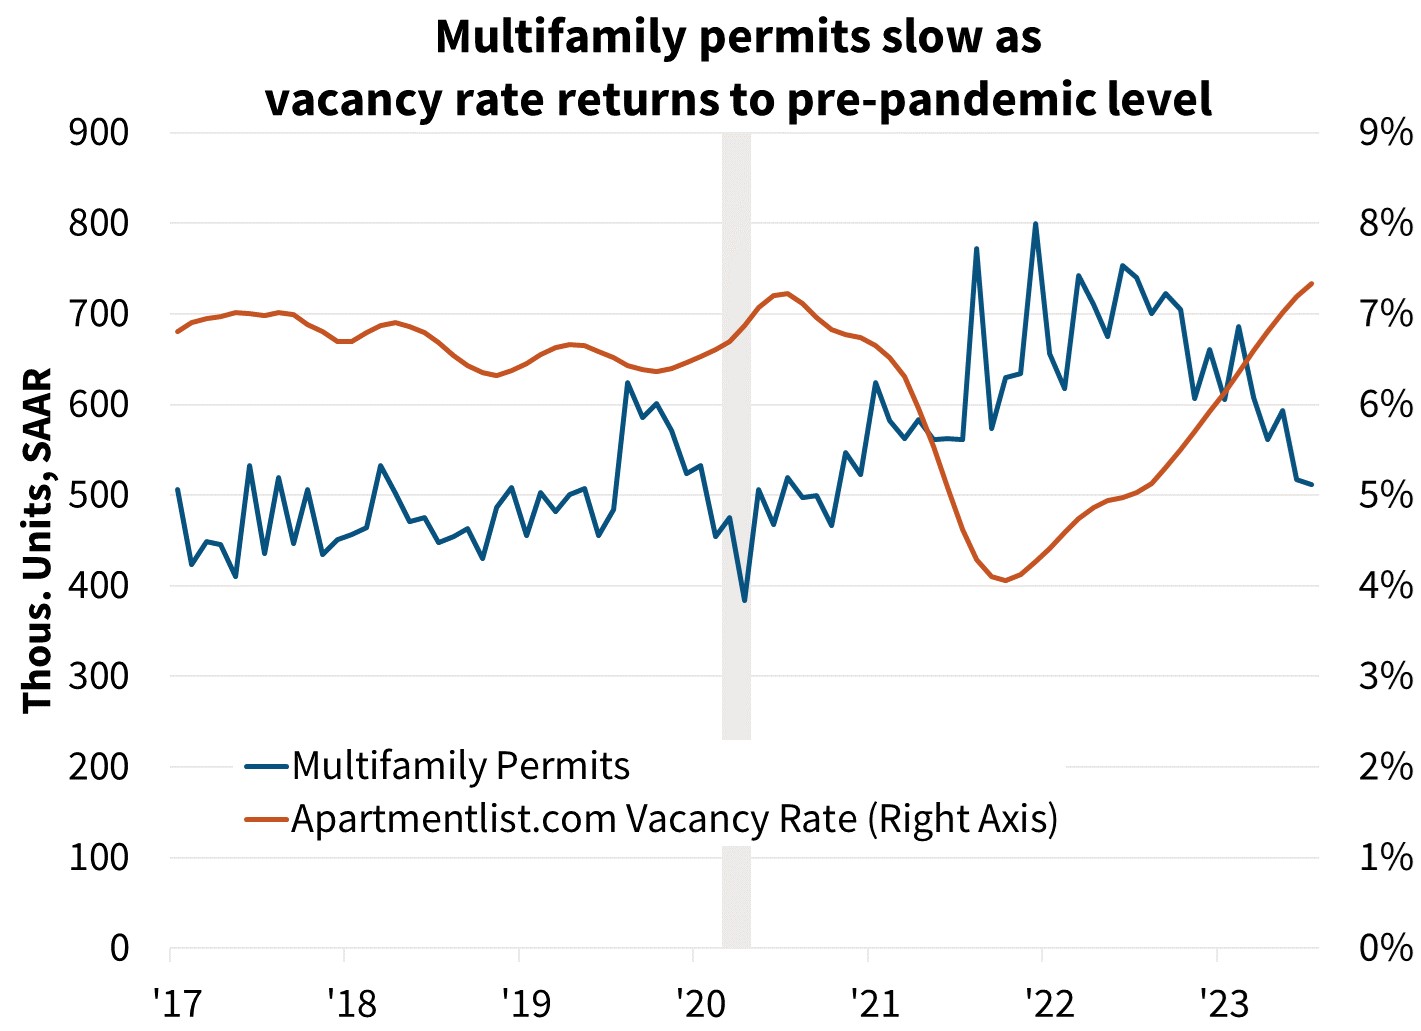  Multifamily permits slow as vacancy rate returns to pre-pandemic level
